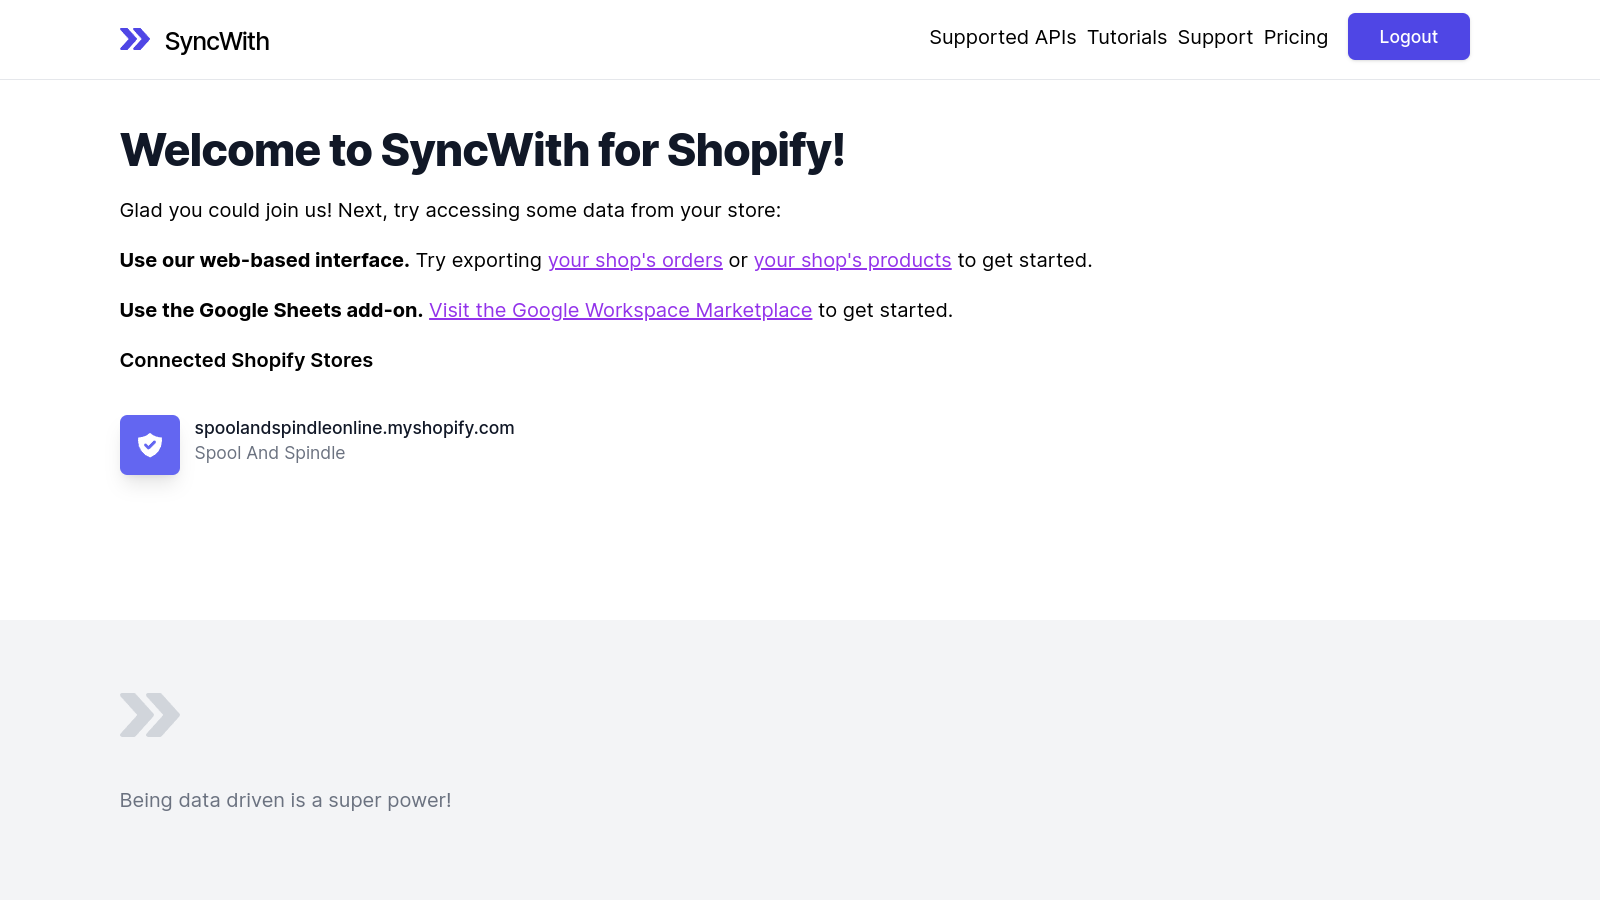 Connect to Shopify with our Google Sheets add-on